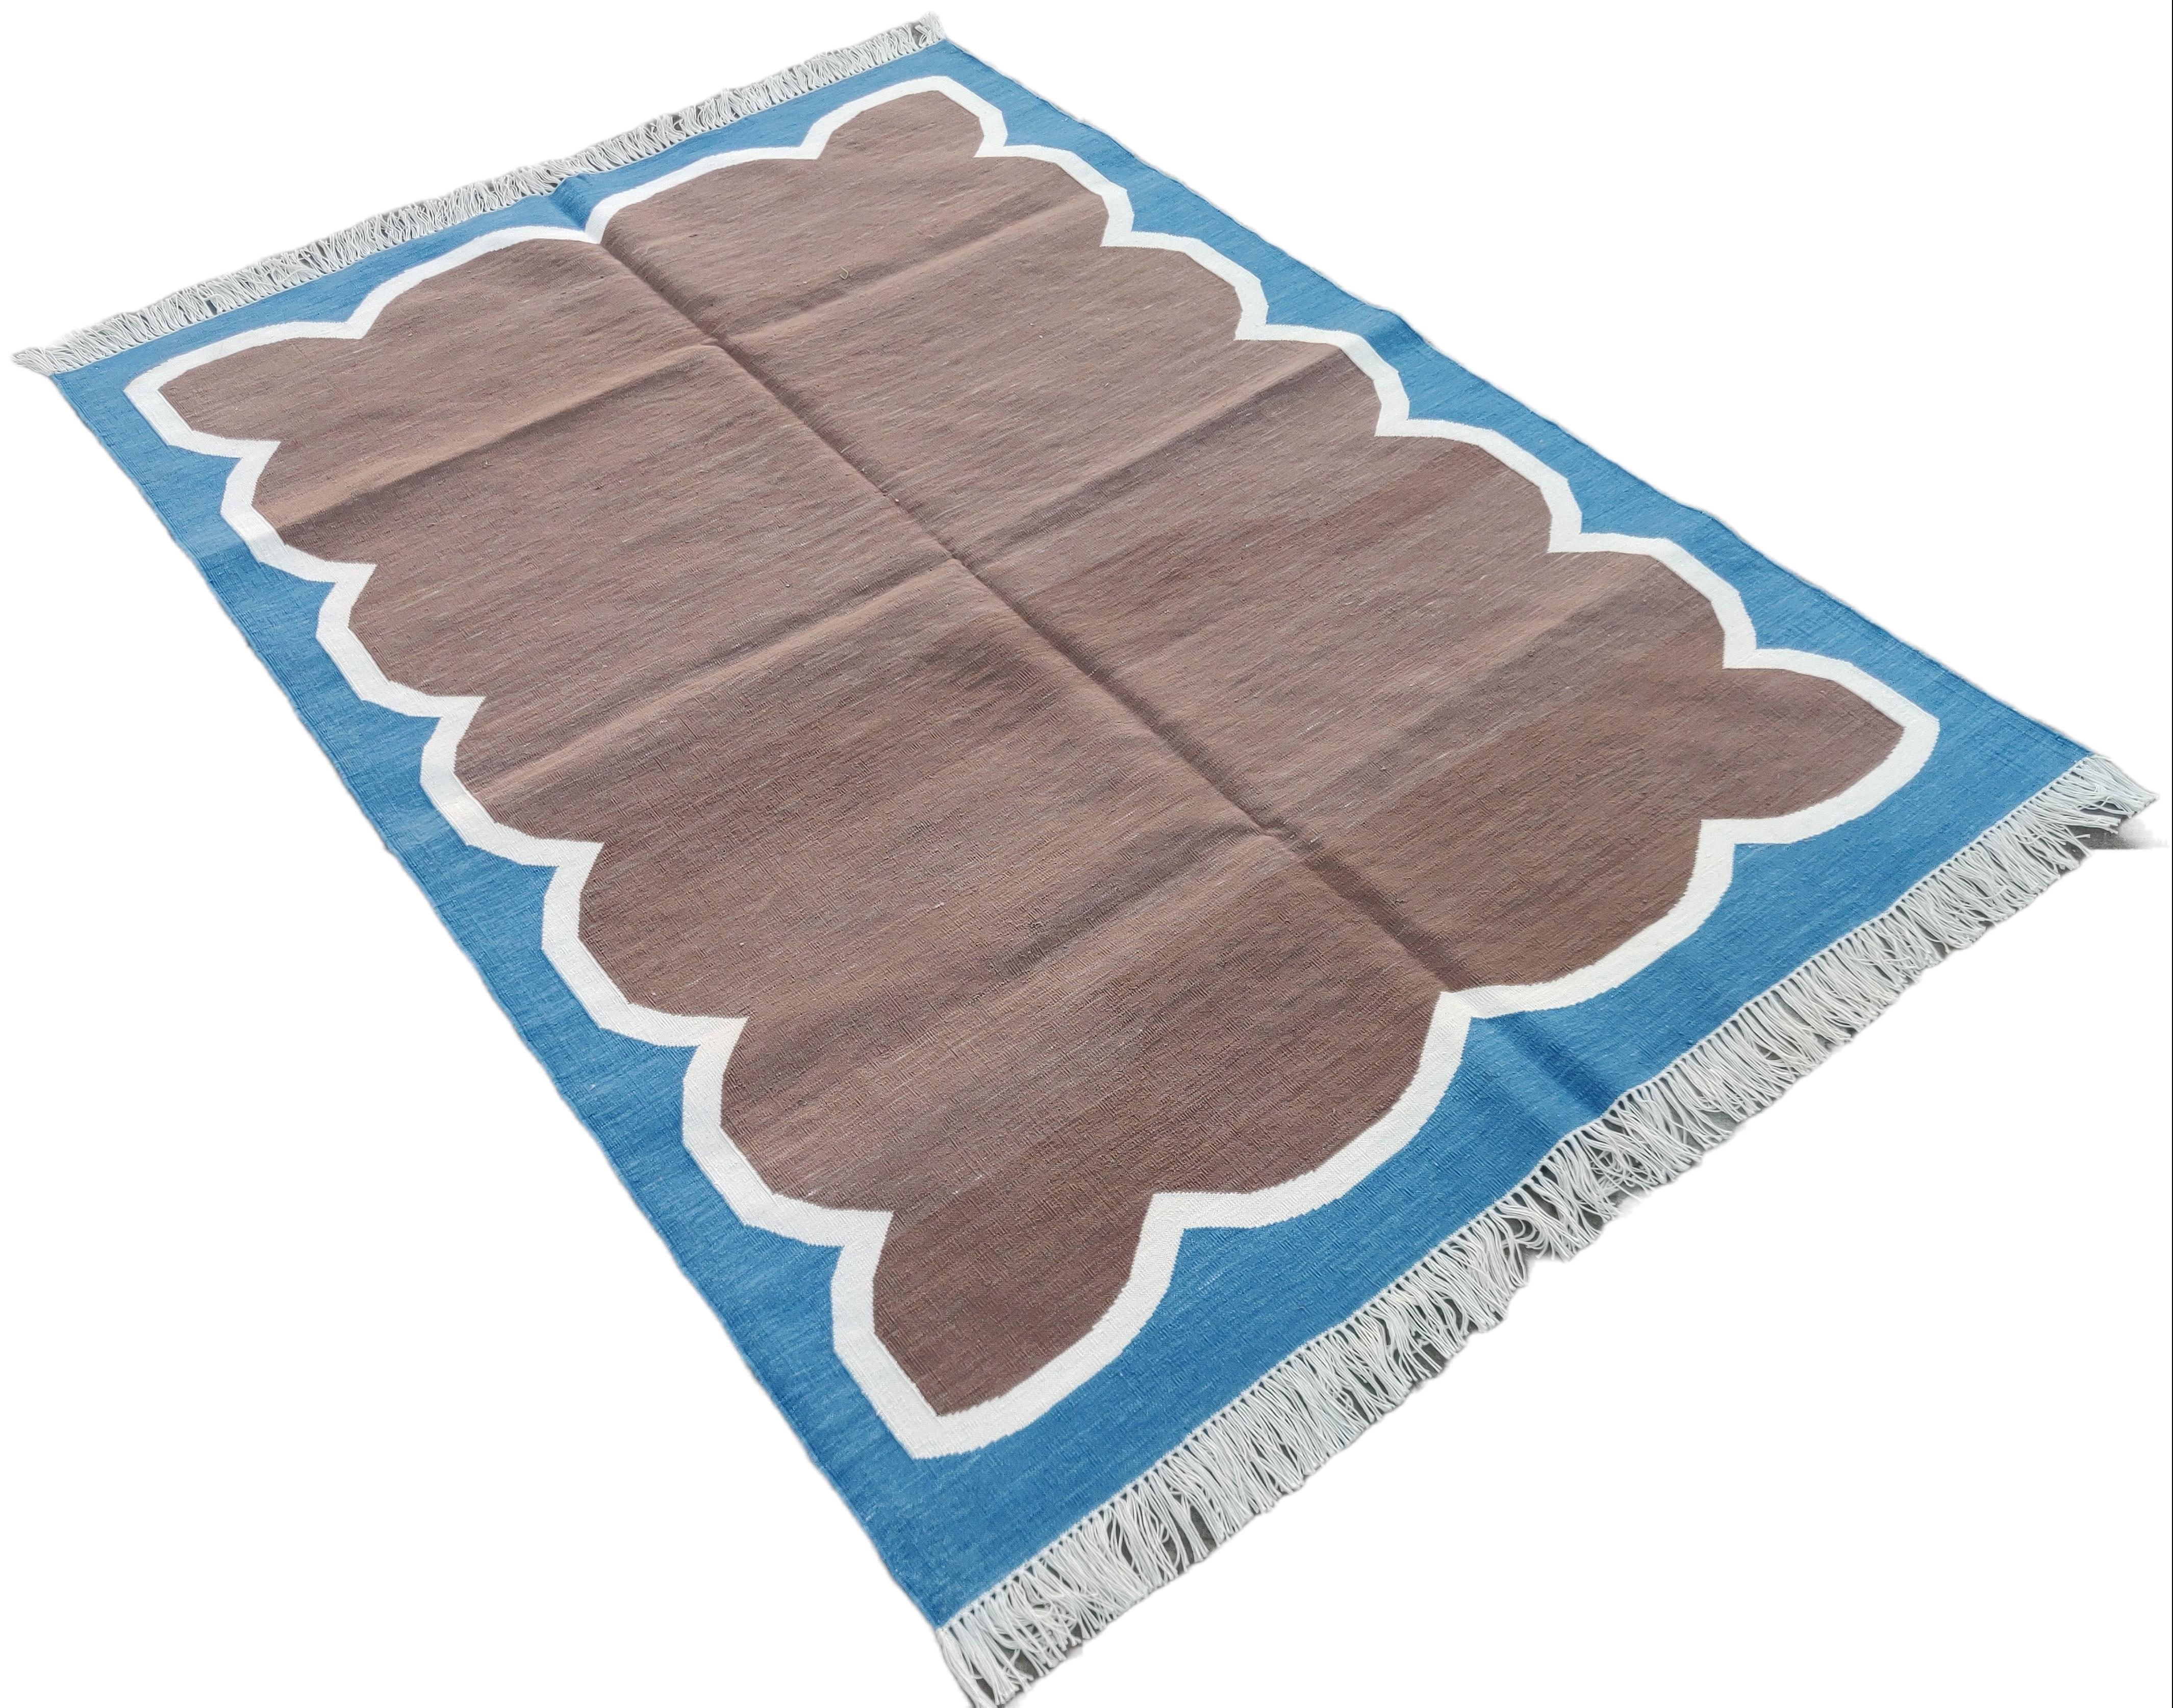 Cotton Vegetable Dyed Brown and Blue Scalloped Striped Indian Dhurrie Rug-4'x6' 

These special flat-weave dhurries are hand-woven with 15 ply 100% cotton yarn. Due to the special manufacturing techniques used to create our rugs, the size and color